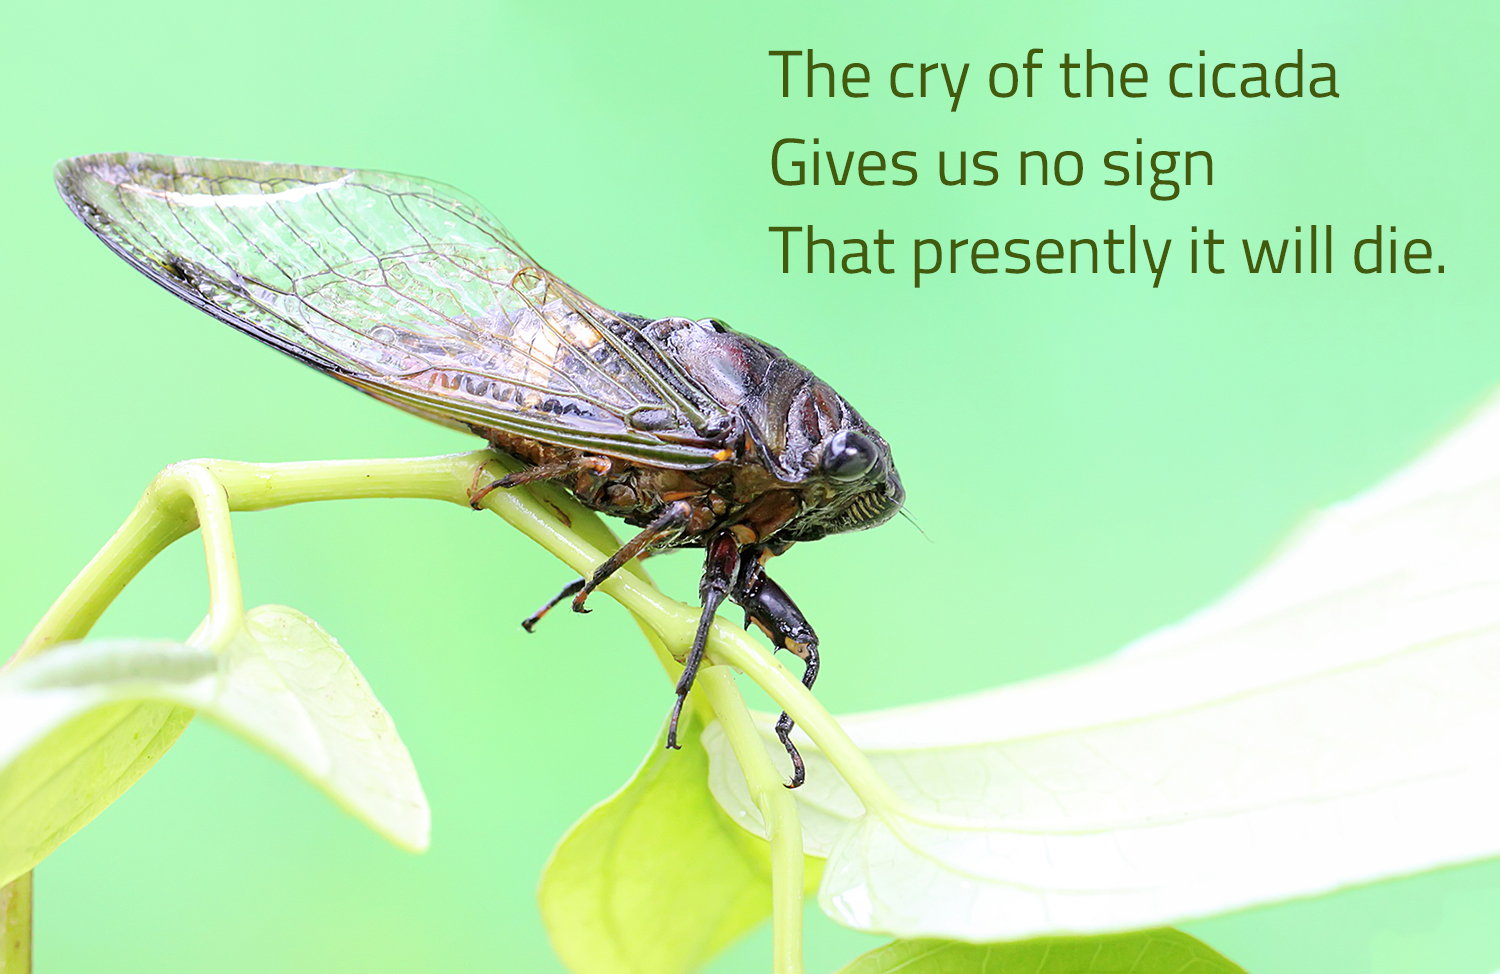 A haiku about a cicada is printed on an image of a cicada on a branch.